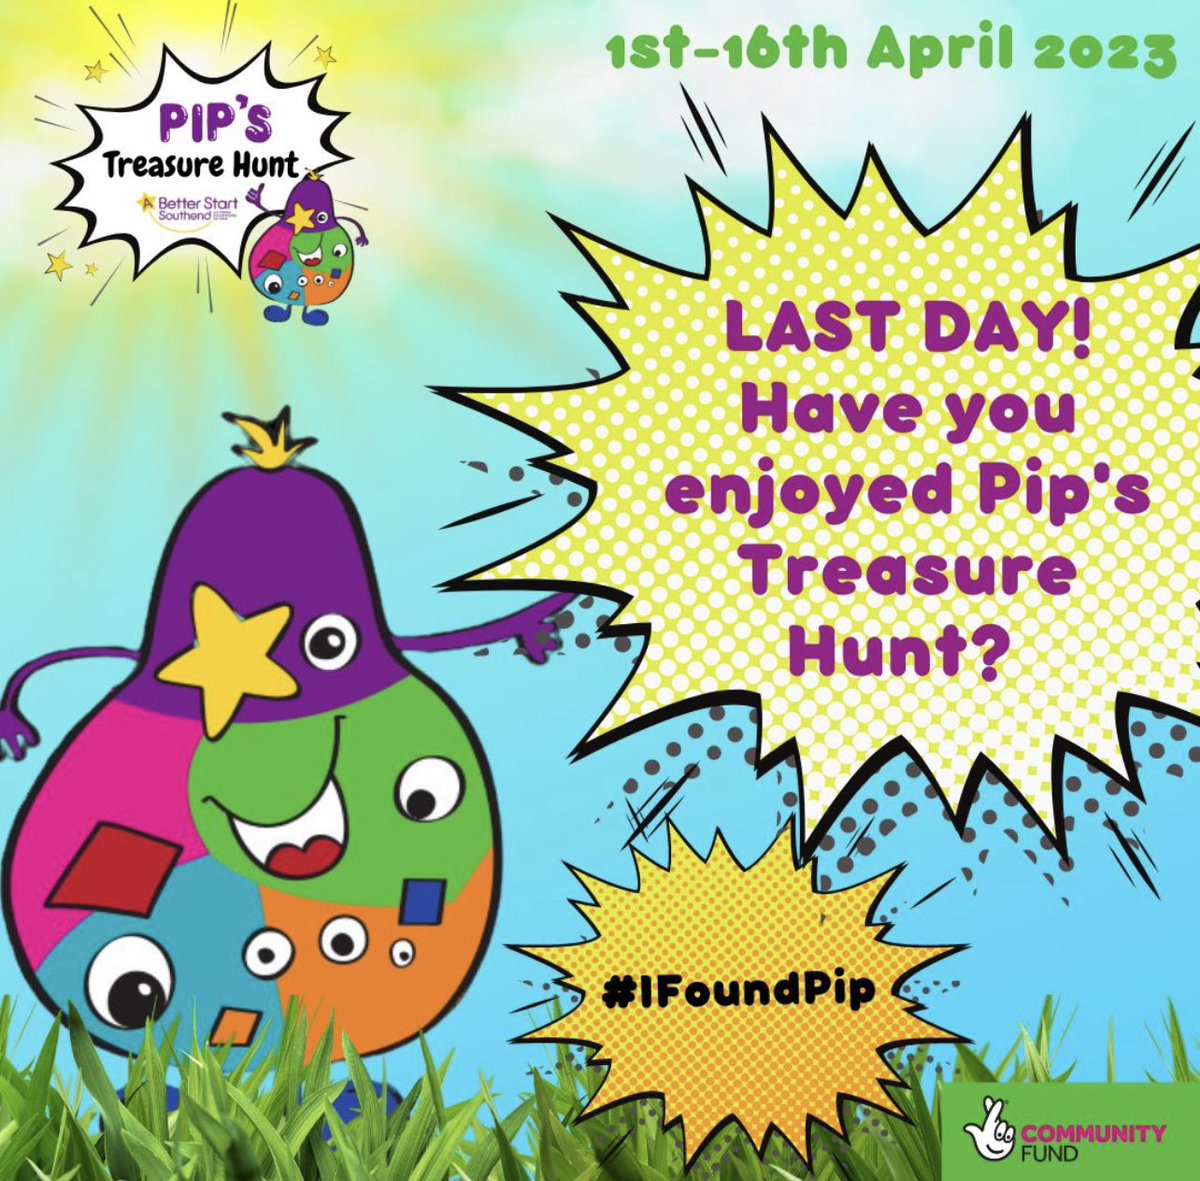 Pip’s Treasure Hunt
LAST DAY!! Finishes at 6pm!

When finished, make sure you select FINISH BOUND so you can see your ranking on the scoreboard.

👉🏻1 minute survey: forms.office.com/e/XGii8vnBgg

#IFoundPip
#ABetterStartSouthend